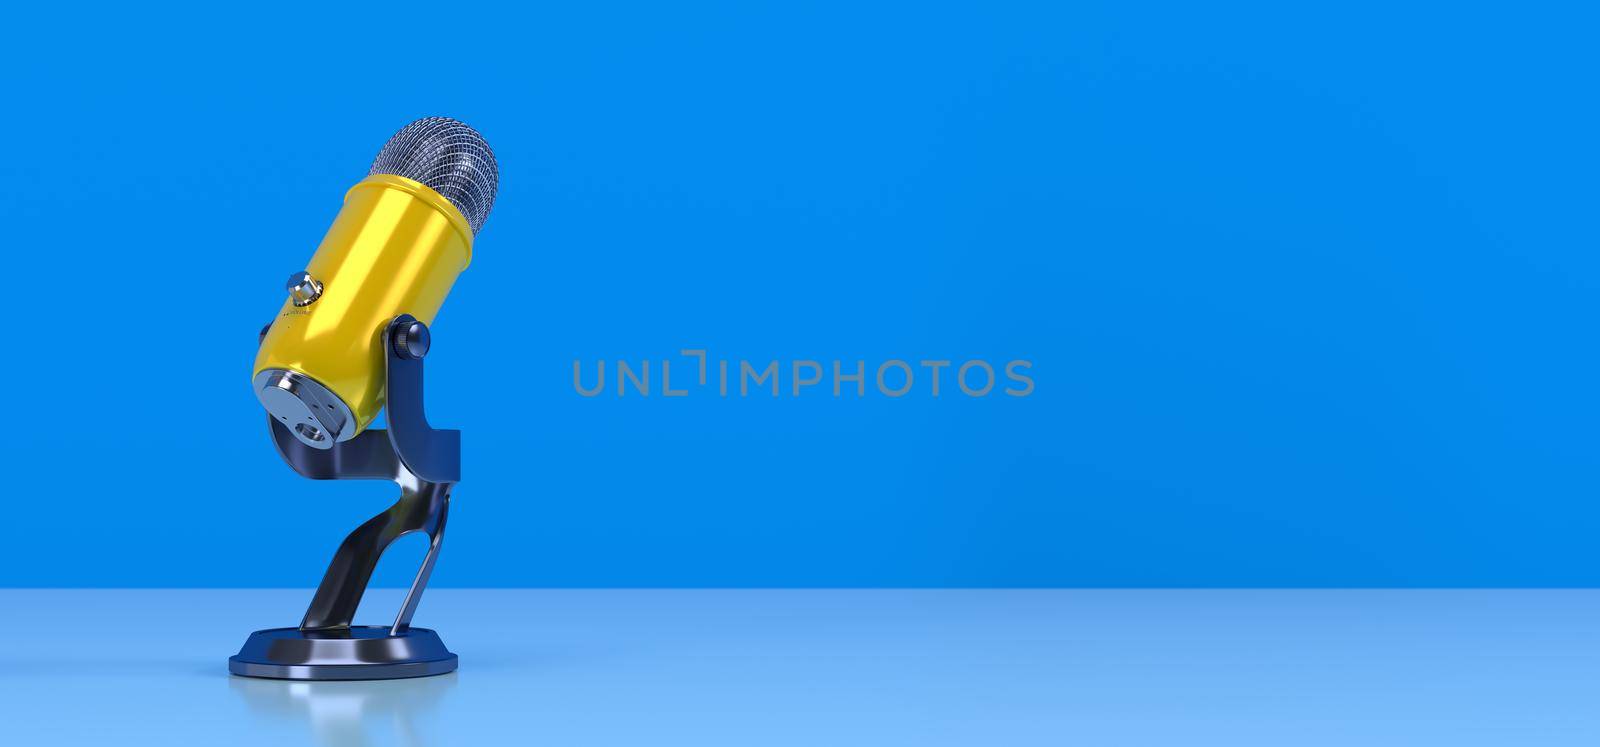 Yellow PODCAST Microphone on blue background. Entertainment and online video conference concept. 3D illustration rendering